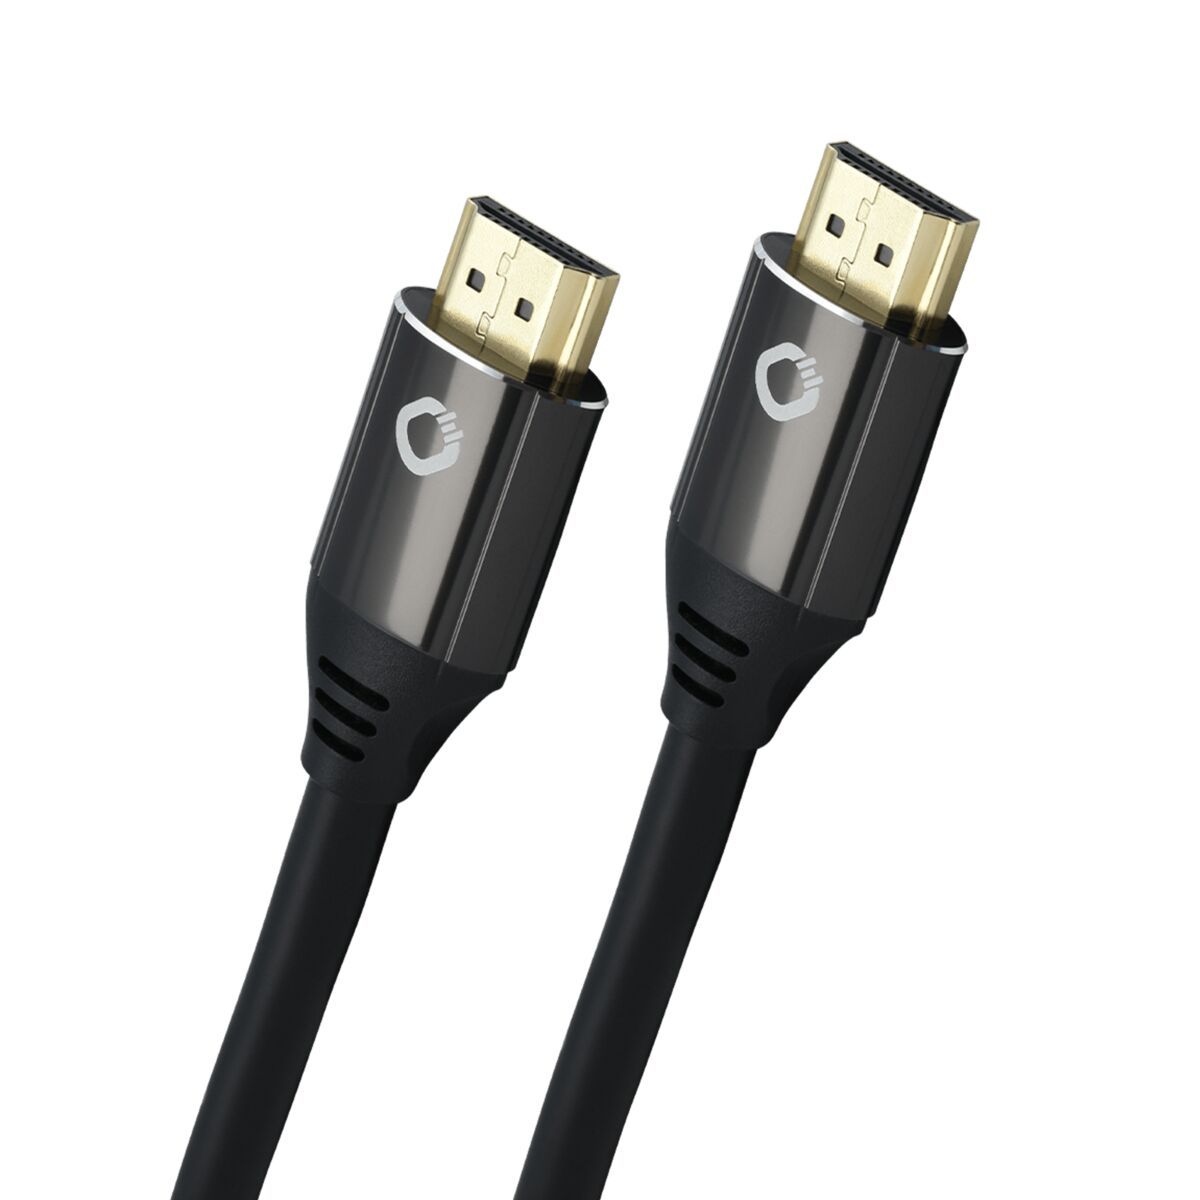 Vogel's Oehlbach Black Magic HDMI® Cable (3 meter) Black Product